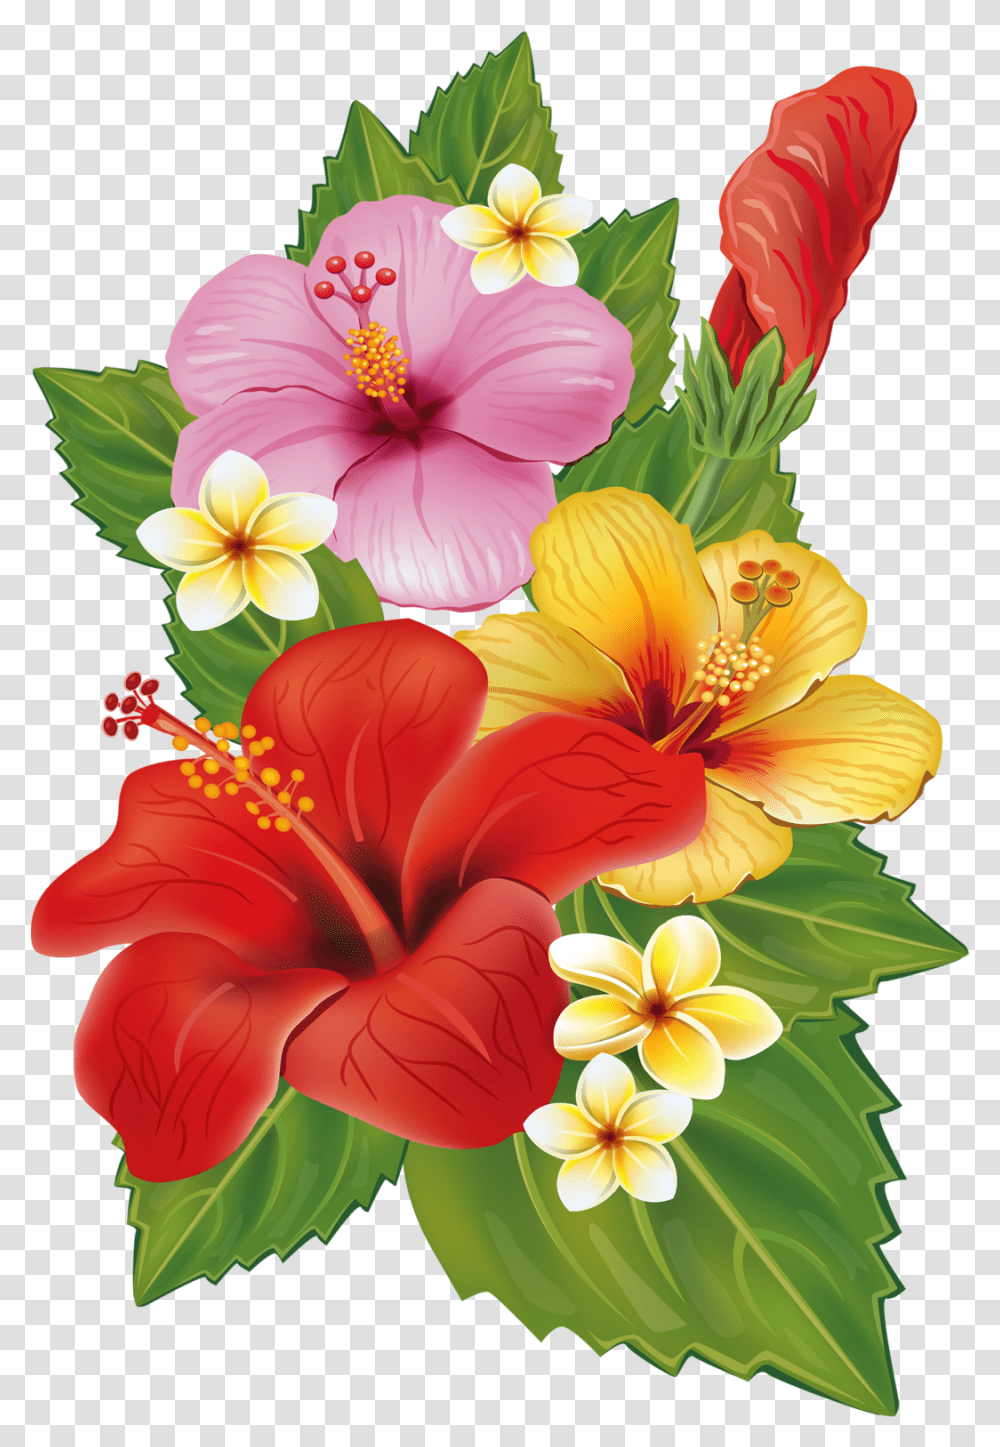 Hawaii Clipart Plumeria Hawaiian Tropical Flowers Background, Plant, Hibiscus, Blossom, Anther Transparent Png